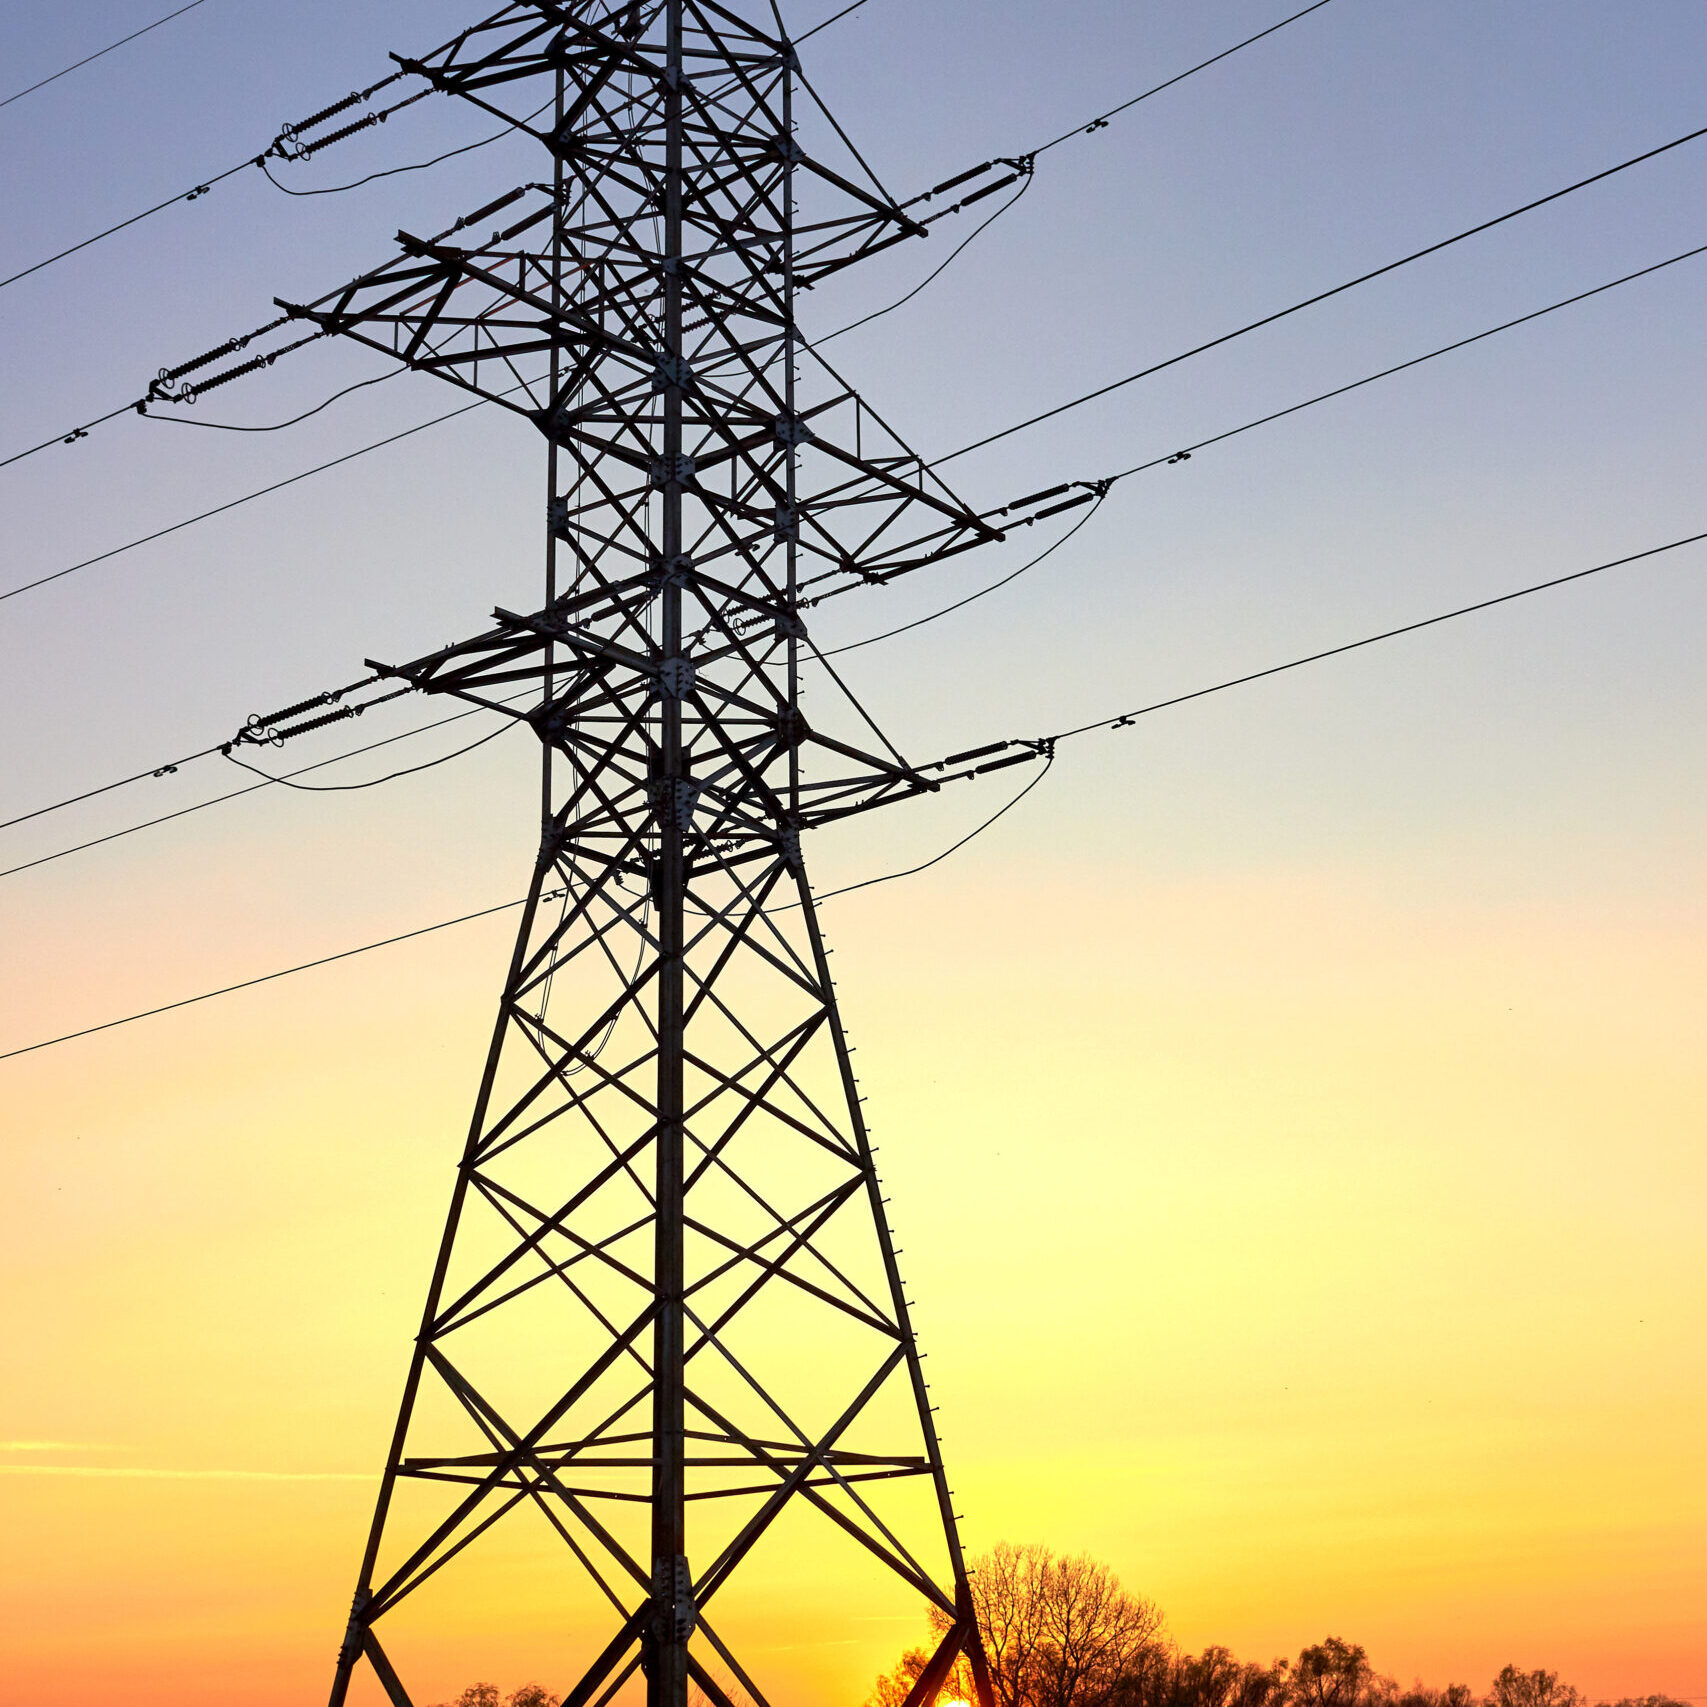 Silhouette Of Pylon And High Voltage Power Lines Against A Colorful Sky At Sunrise Or Sunset - electricity generated by renewable natural gas from anaerobic digestion